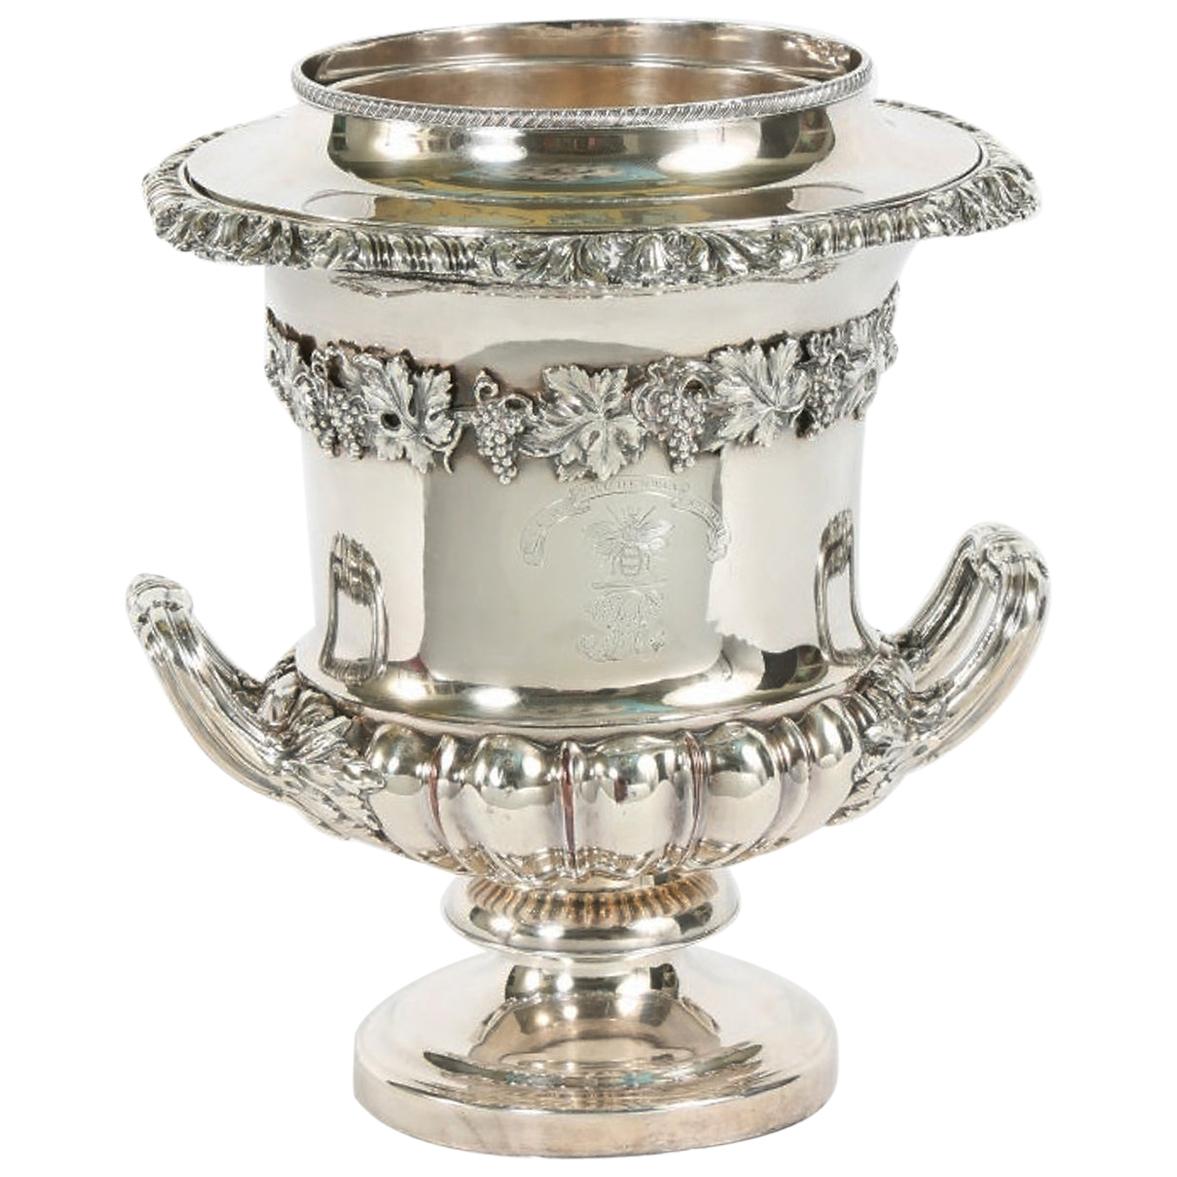 Late 19th Century English Plated Wine Cooler